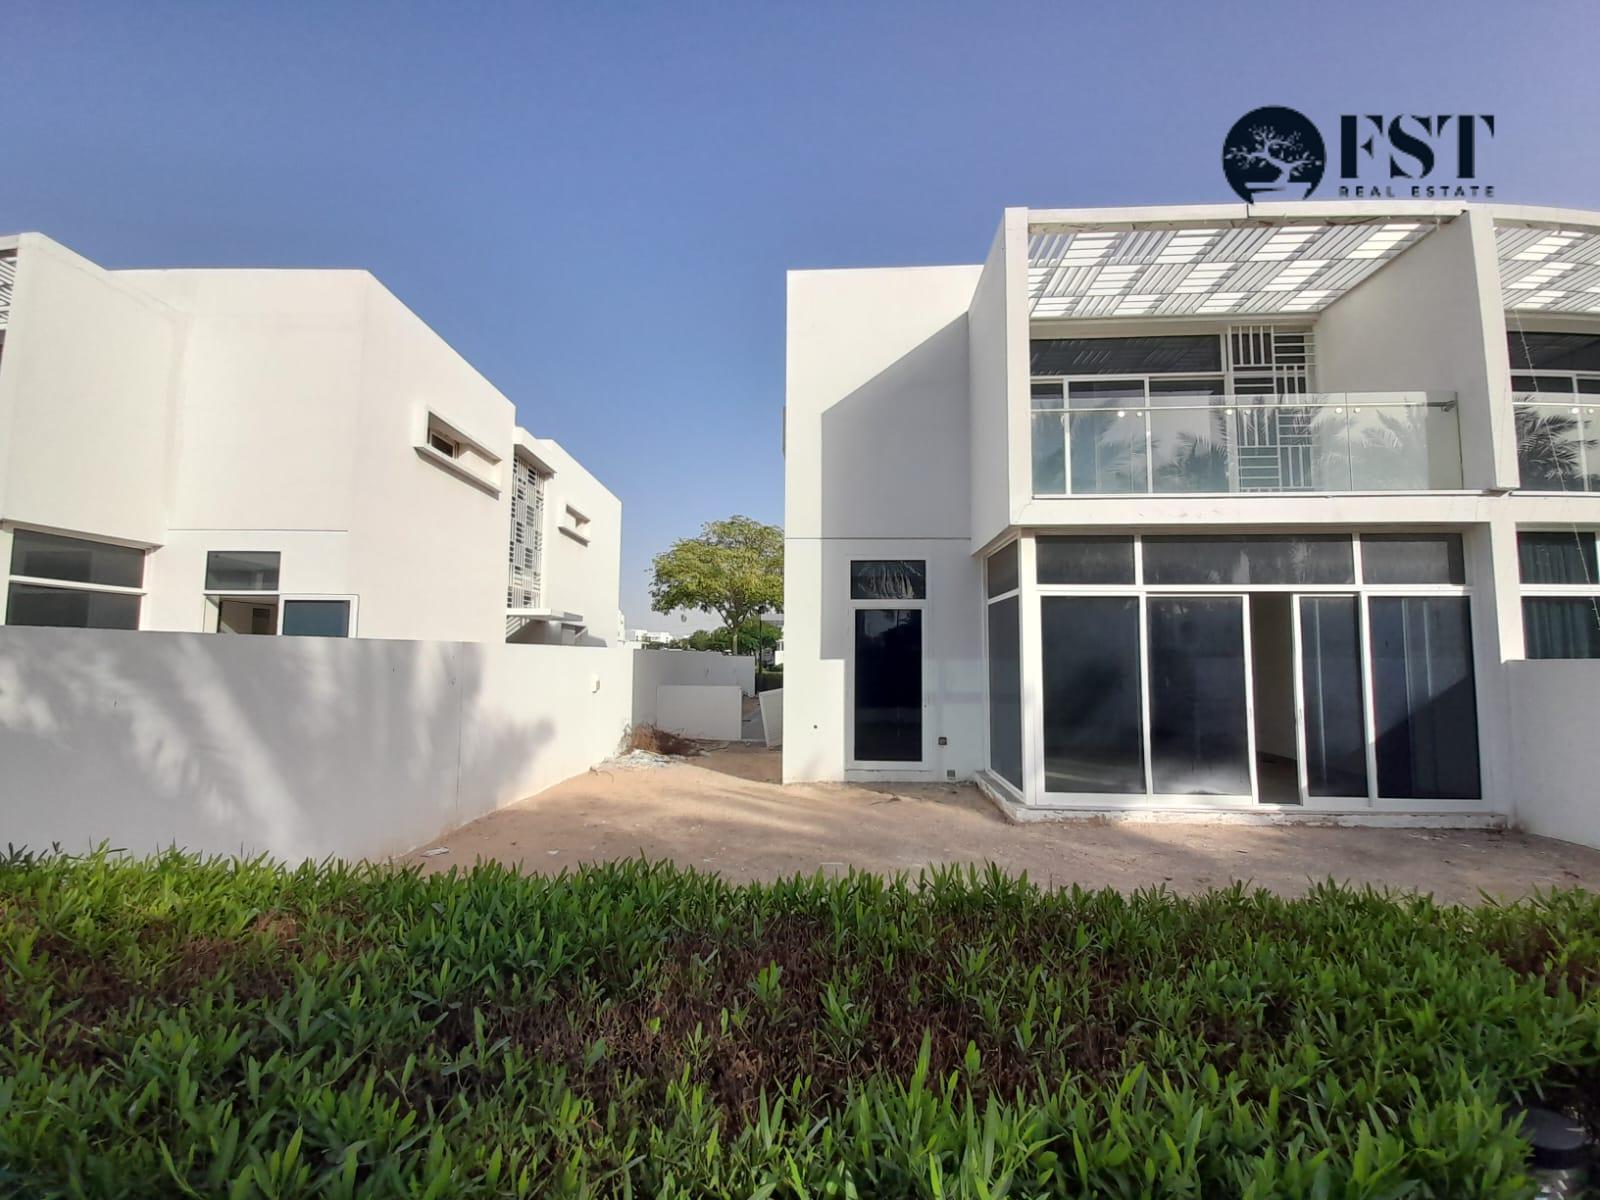 3 bed, 4 bath Villa for rent in Mudon Views, Mudon, Dubai for price AED 185000 yearly 